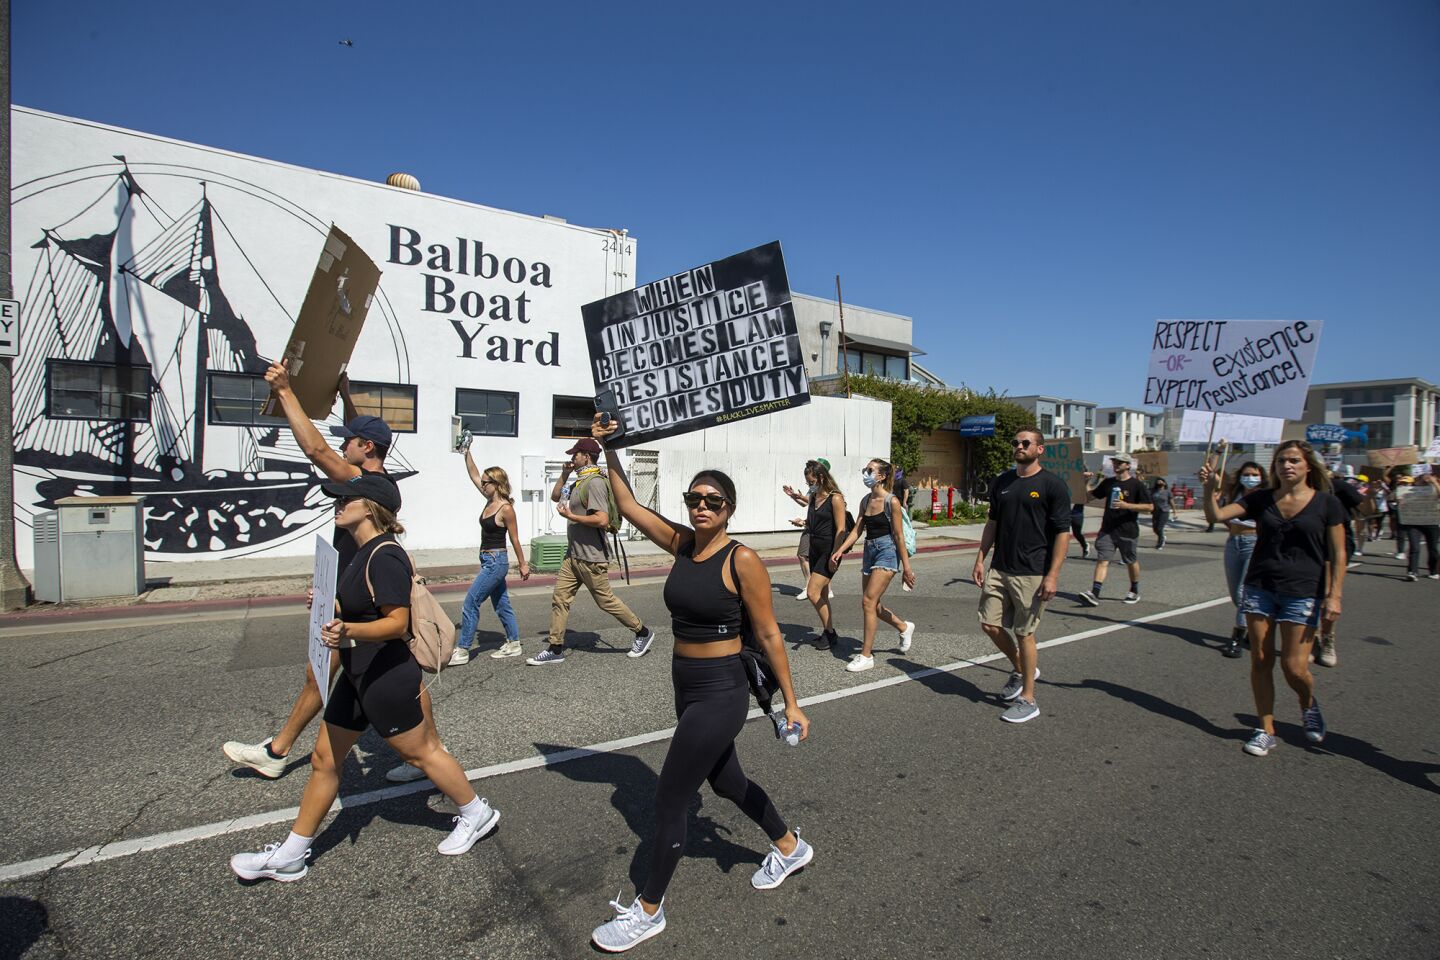 Demonstrators walk down Balboa Boulevard during a protest on Wednesday.